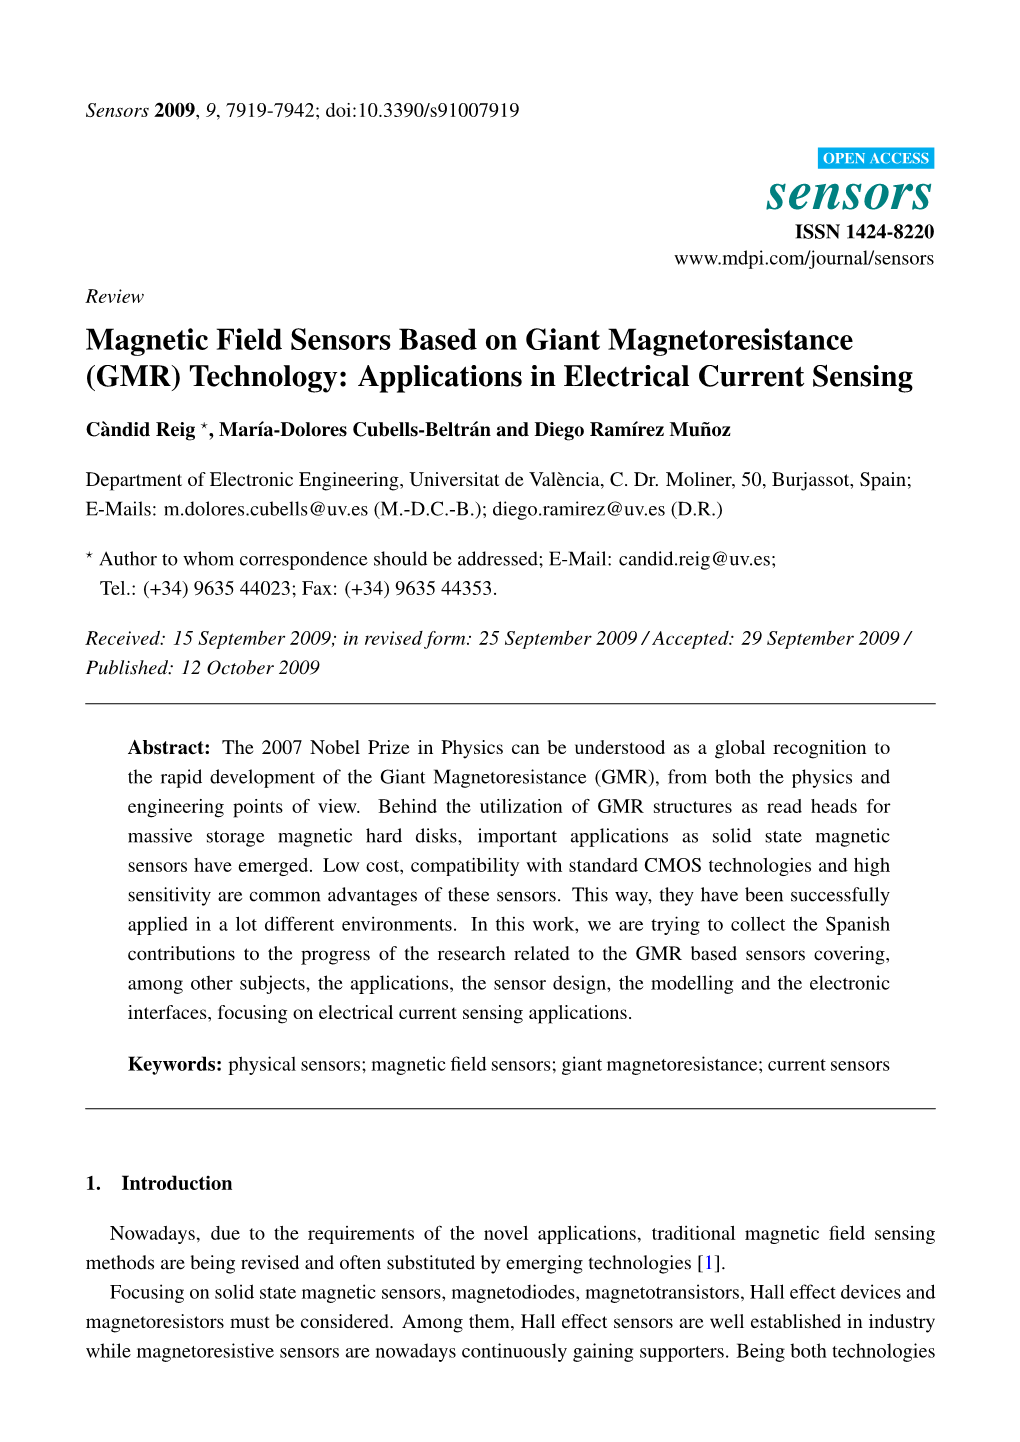 Magnetic Field Sensors Based on Giant Magnetoresistance (GMR) Technology: Applications in Electrical Current Sensing